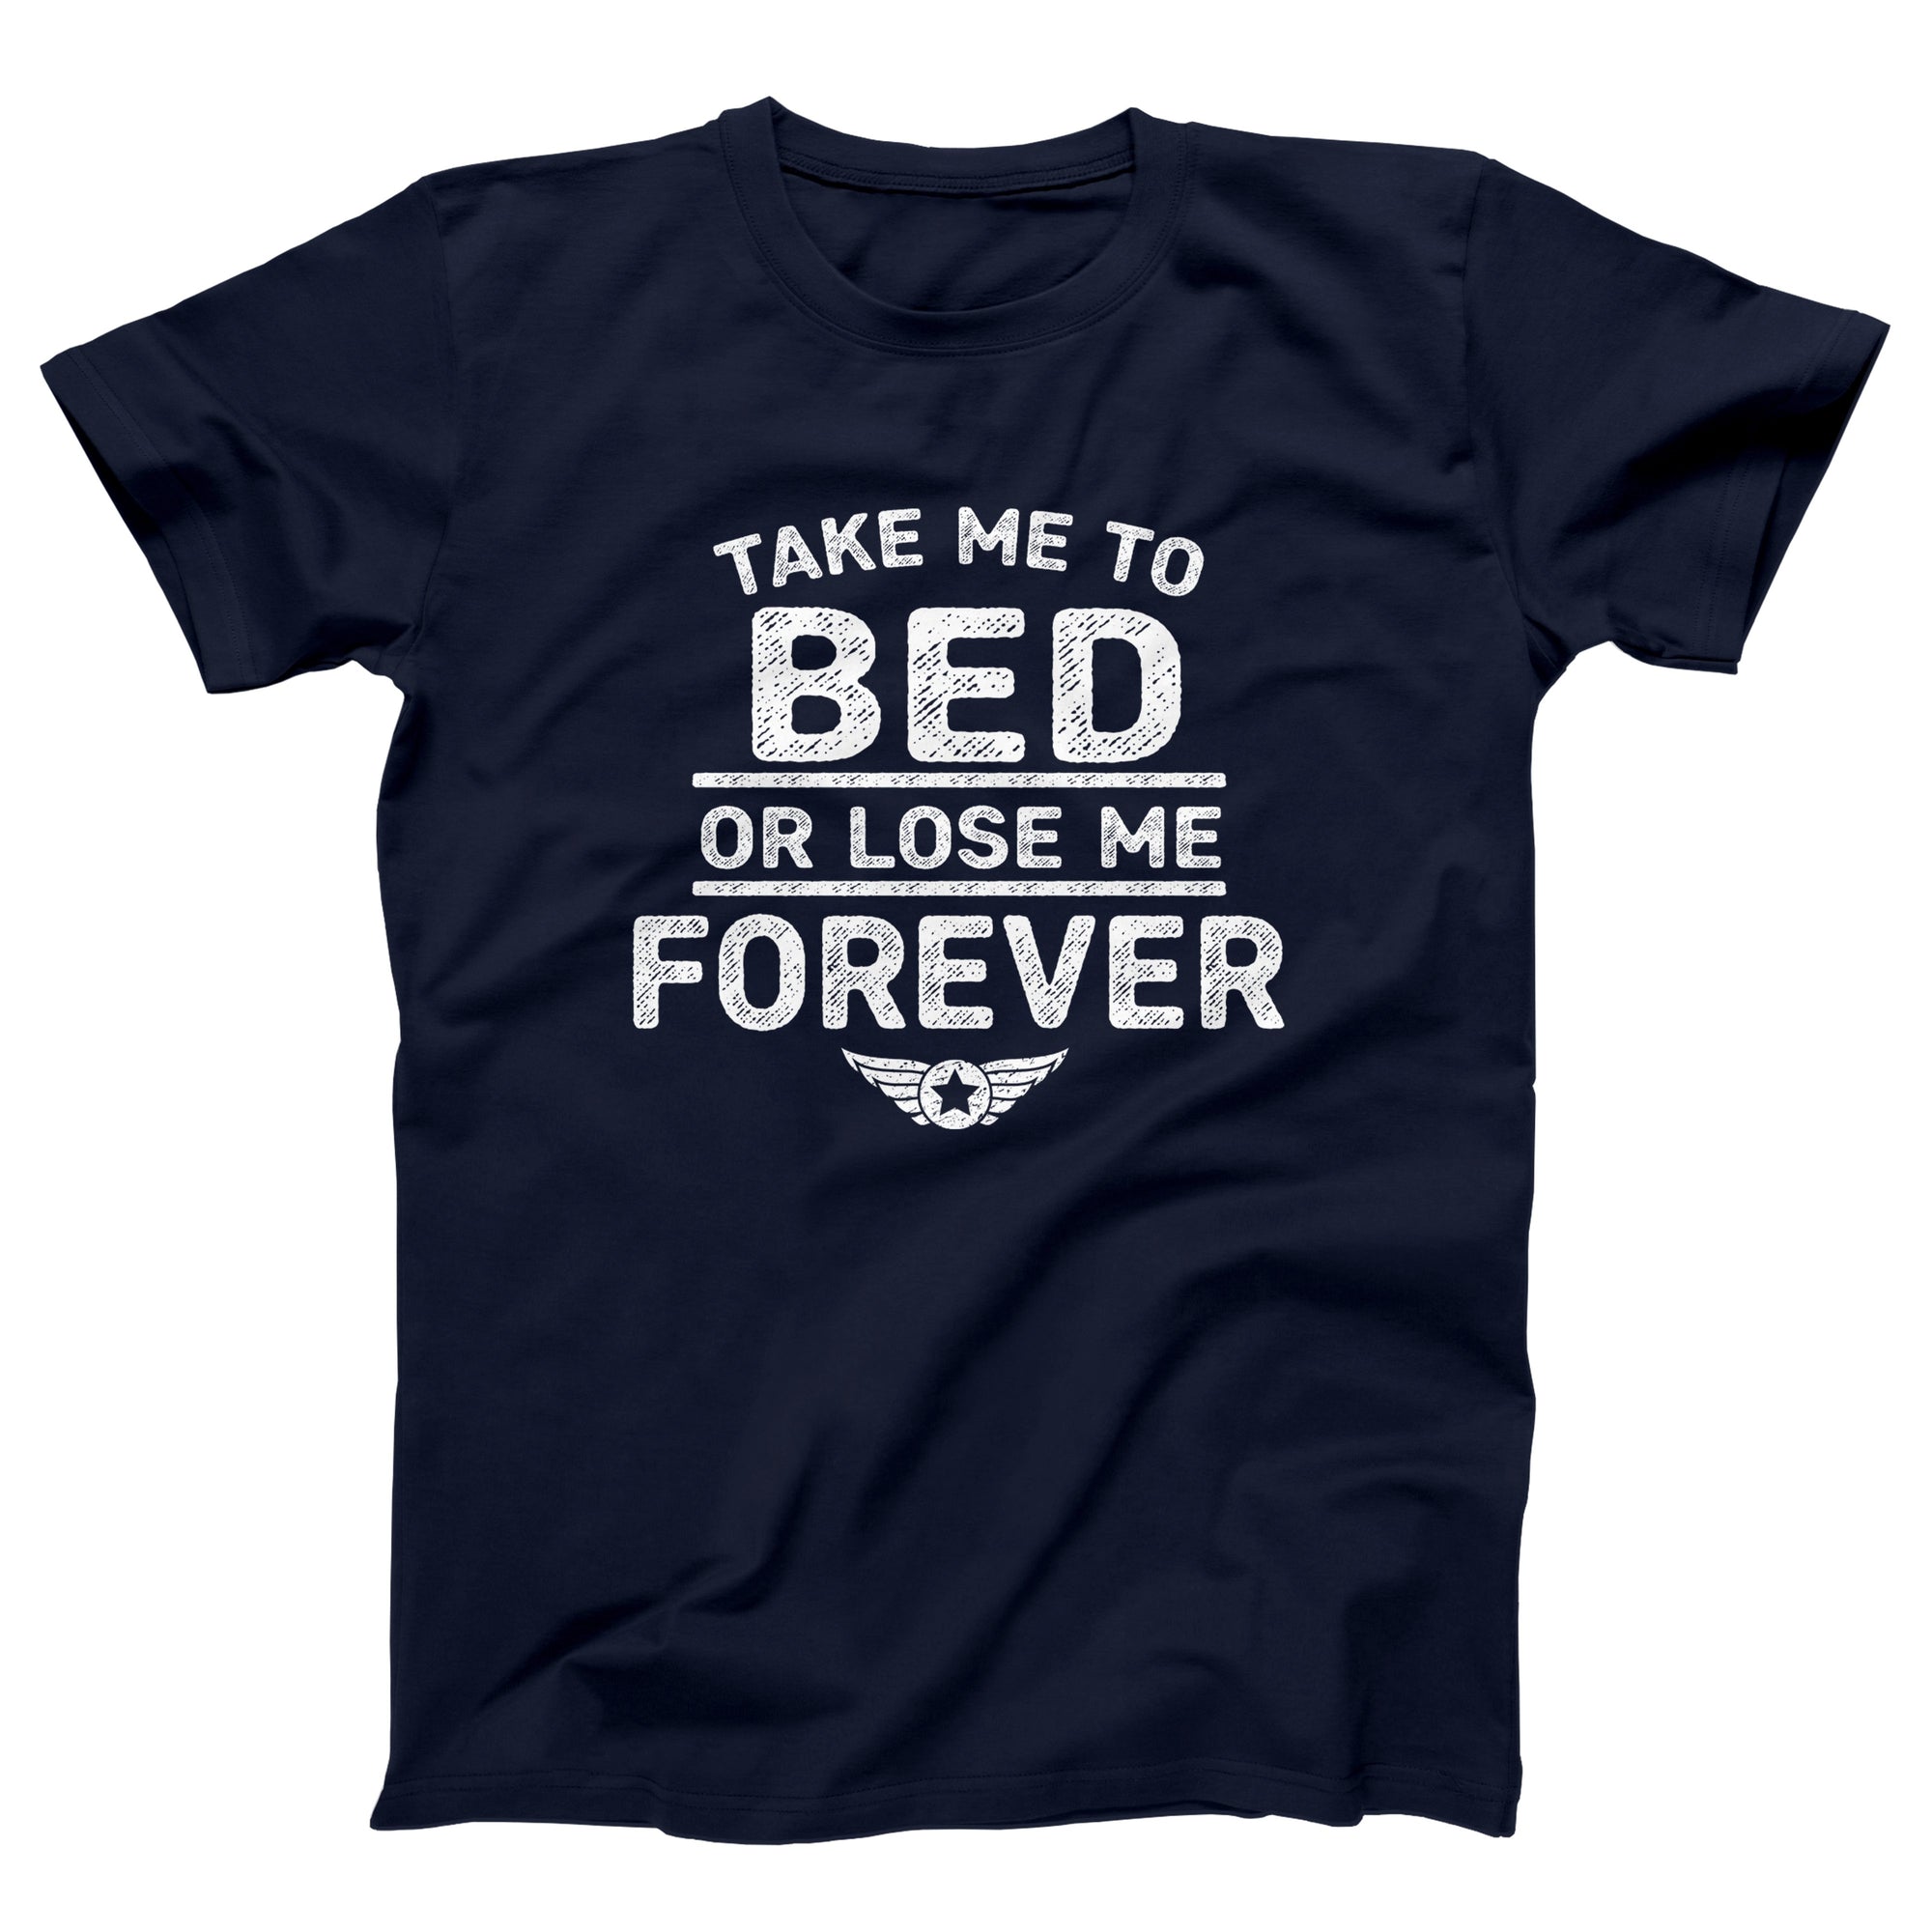 Take Me To Bed Or Lose Me Forever Adult Unisex T-Shirt - anishphilip